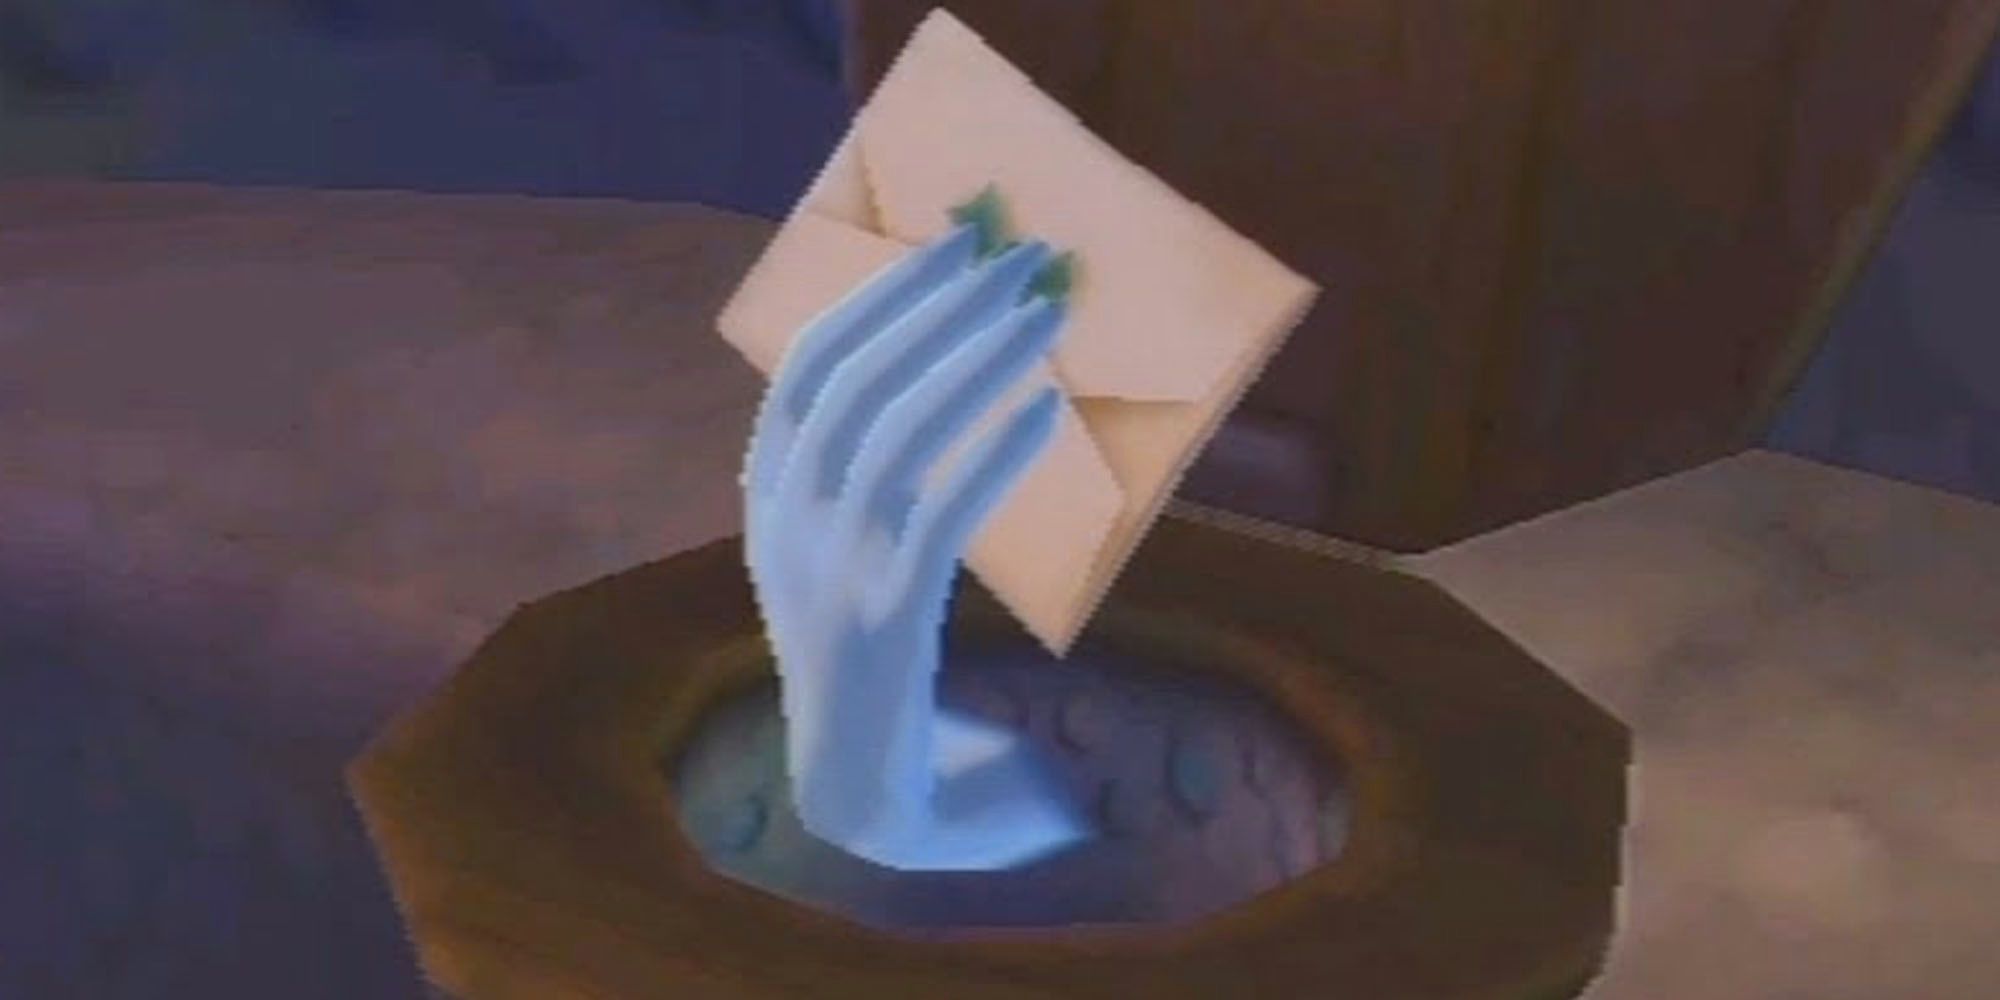 Skyward Sword: How to Complete the Cawlin's Letter Side Quest